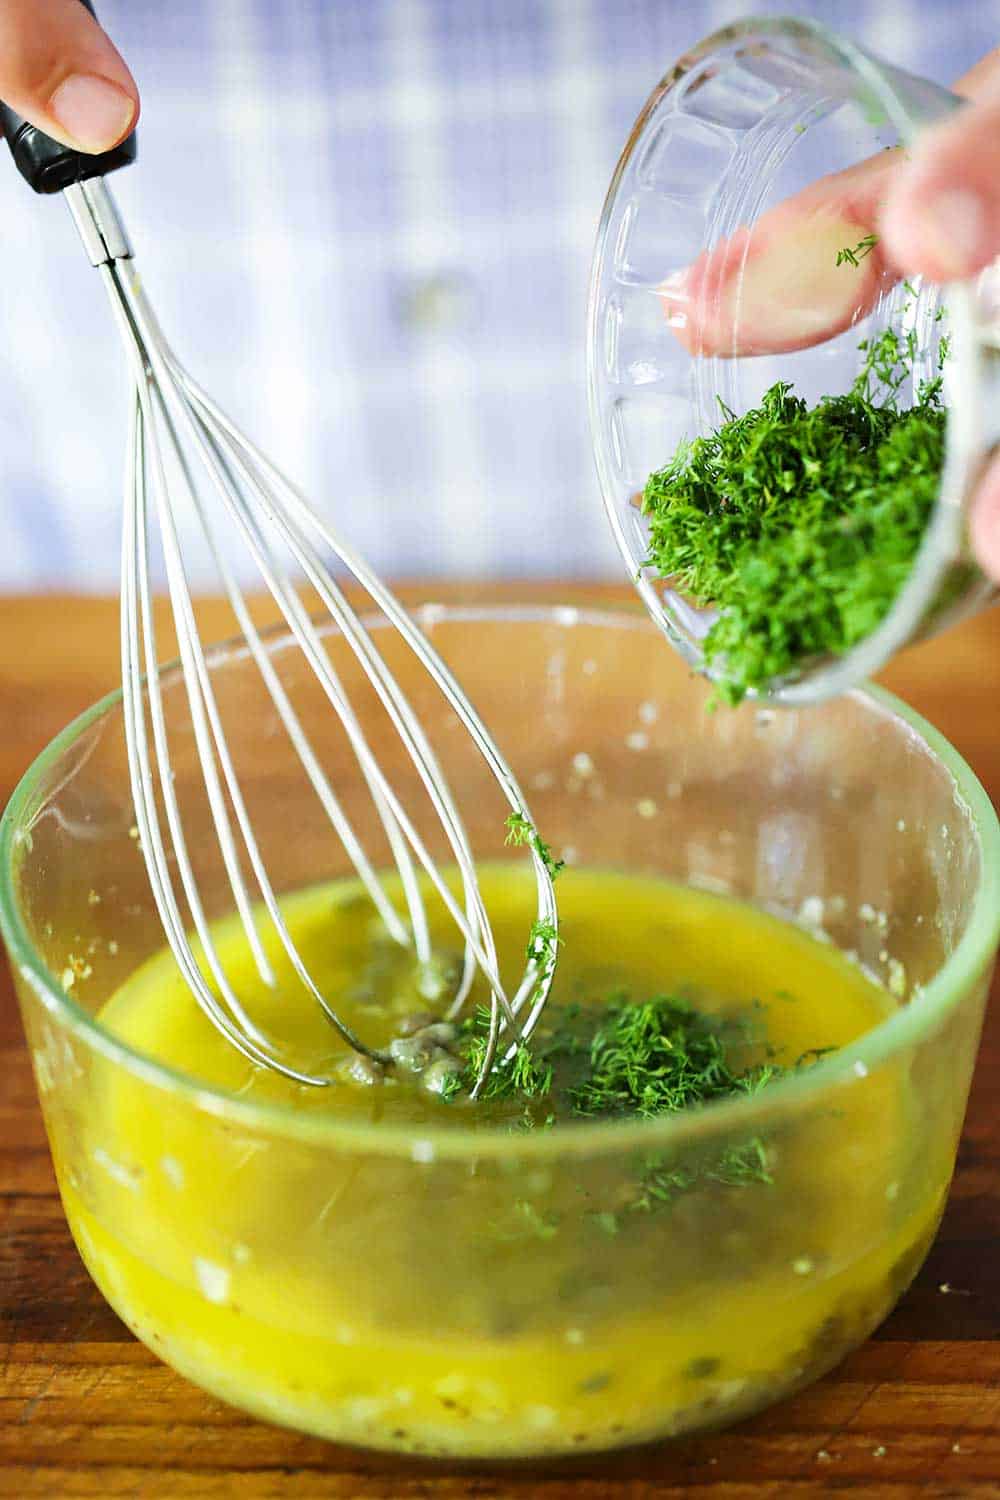 A hand dropping fresh dill from a small bowl into another glass bowl filled with lemon vinaigrette with a whisk in it.